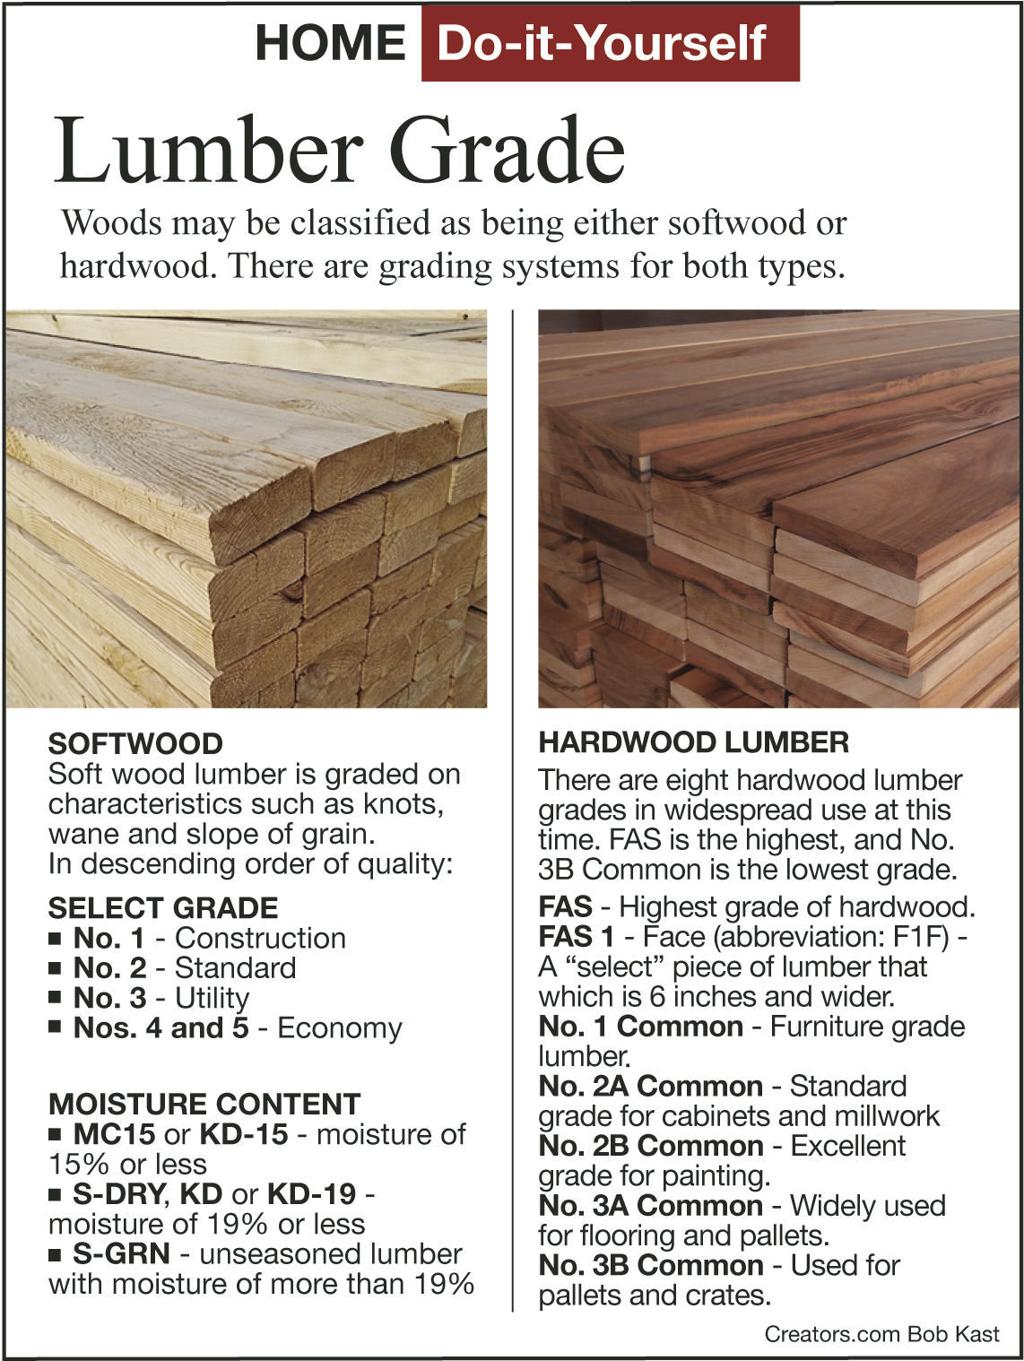 Using Proper Lumber Makes Projects Easier Siouxland Homes Siouxcityjournal Com